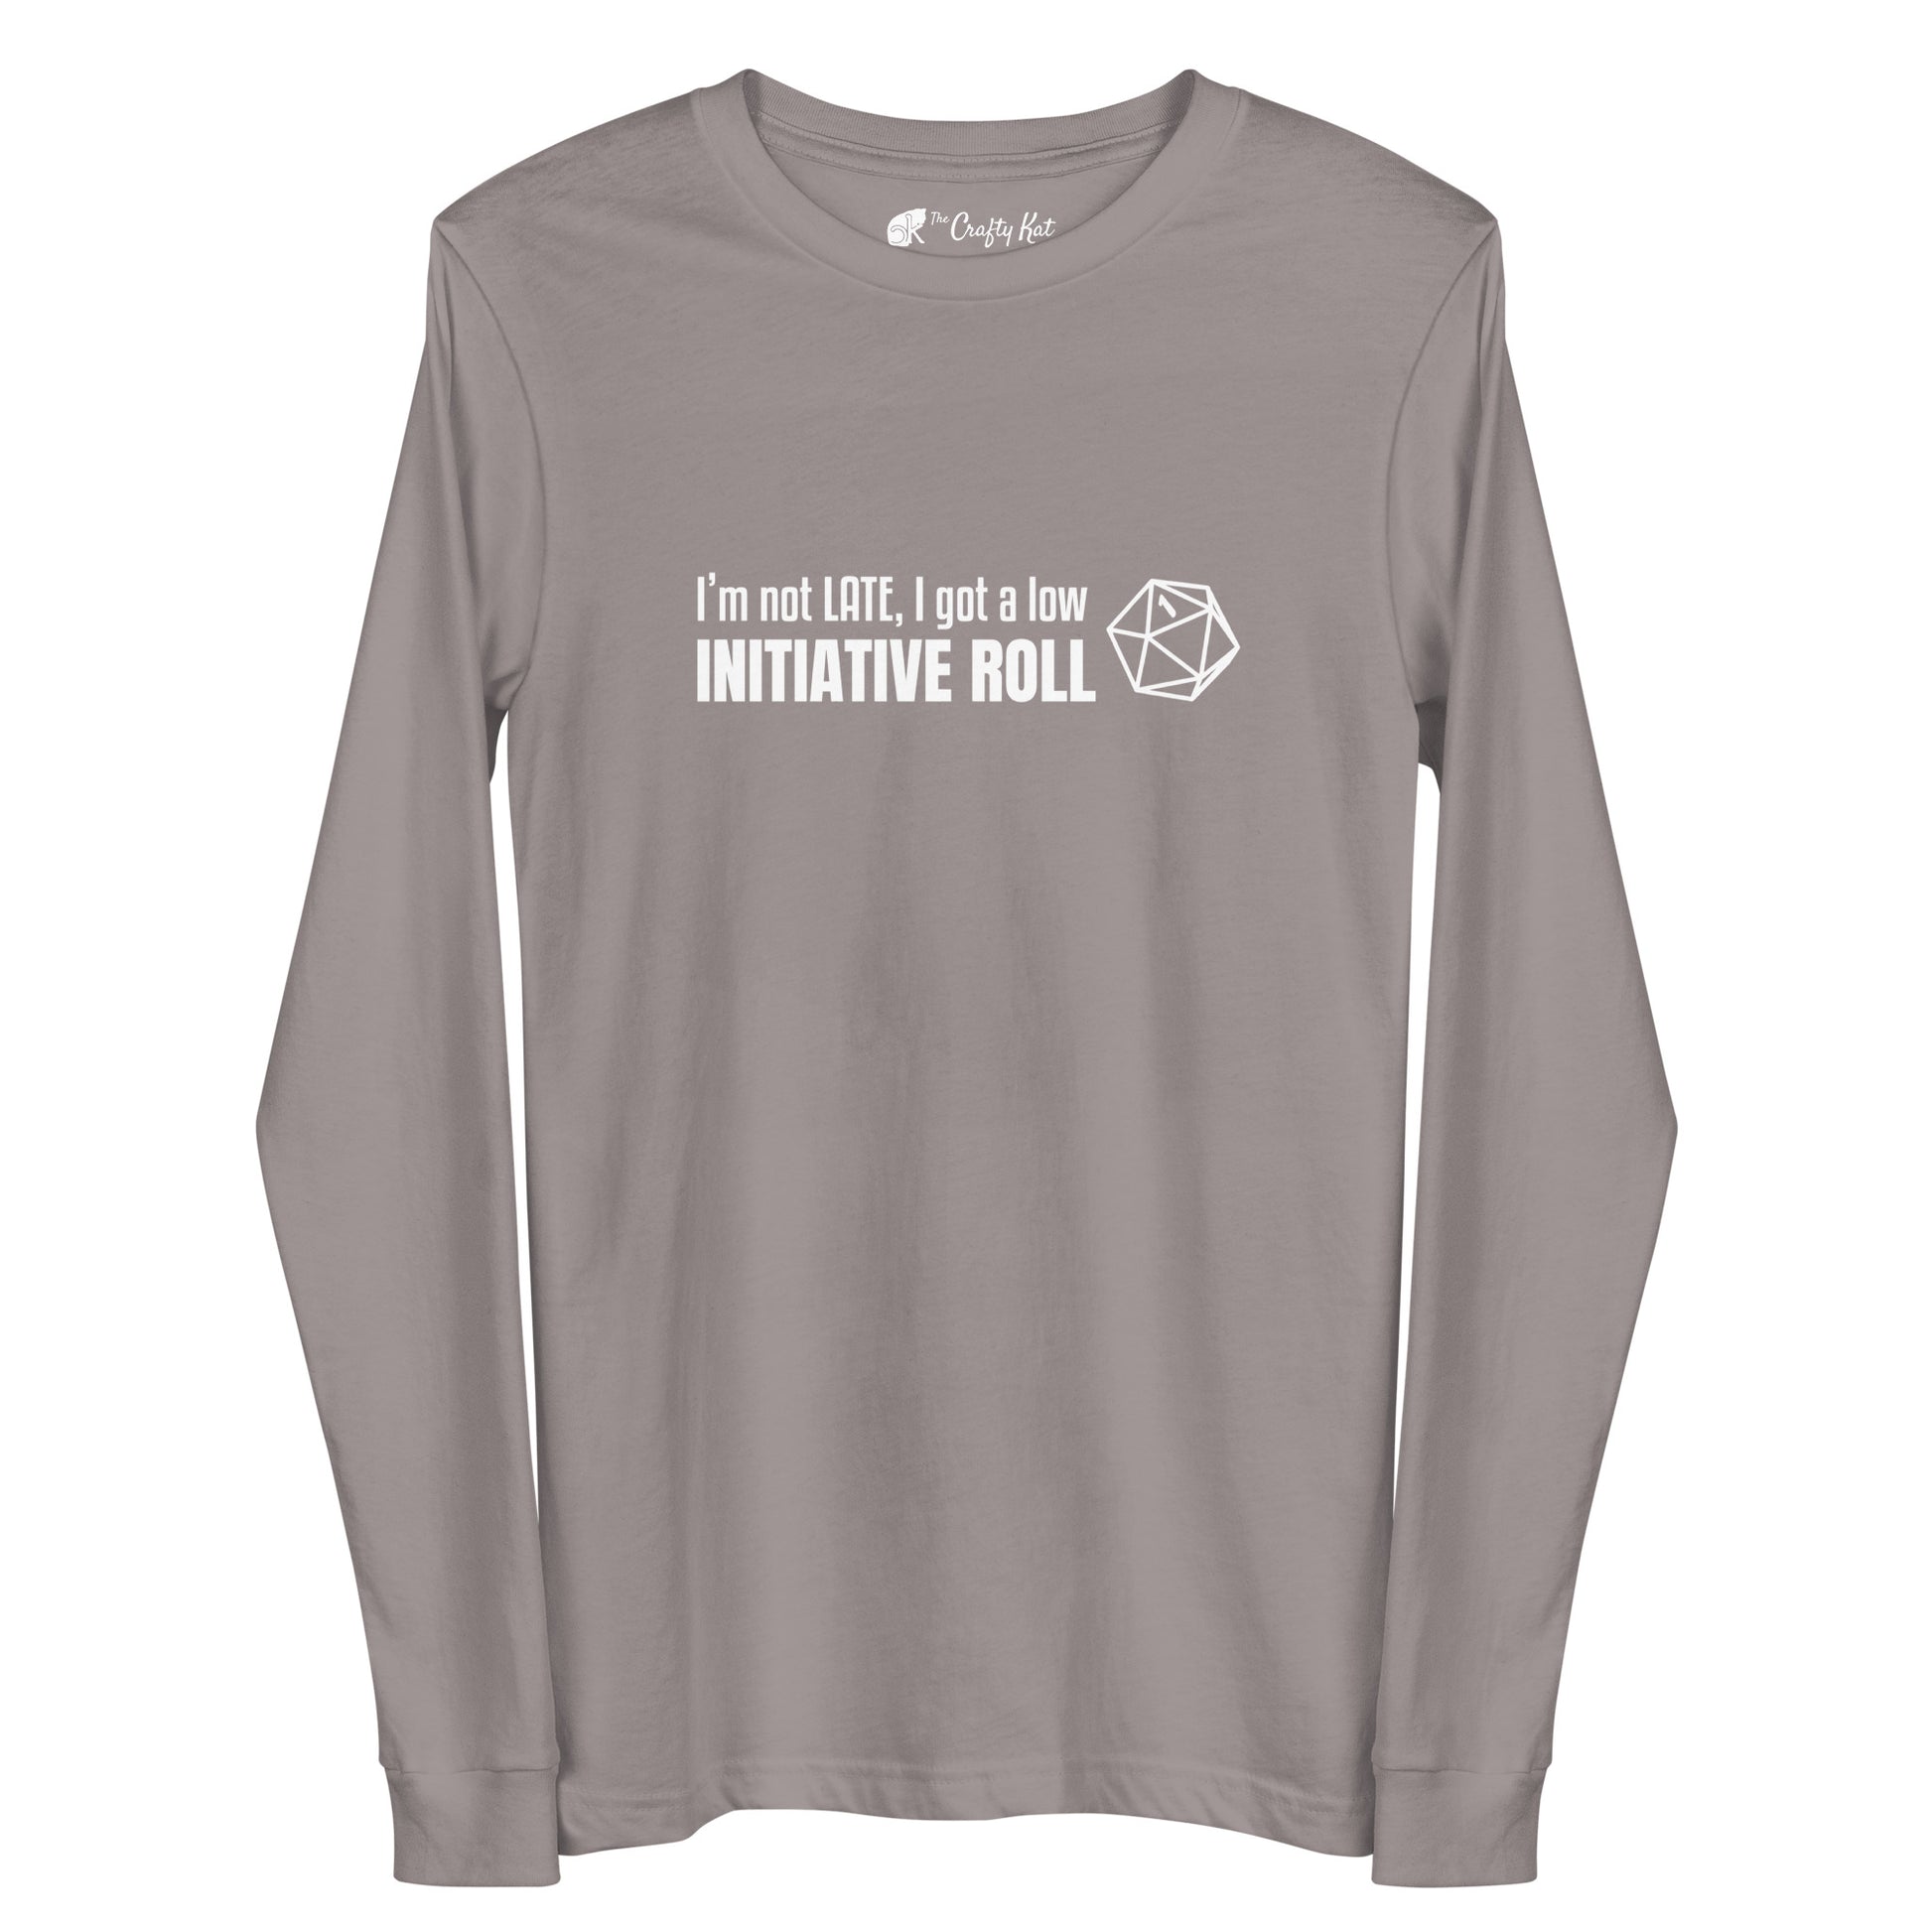 Storm (light grey) long-sleeve tee with a graphic of a d20 (twenty-sided die) showing a roll of "1" and text: "I'm not LATE, I got a low INITIATIVE ROLL"